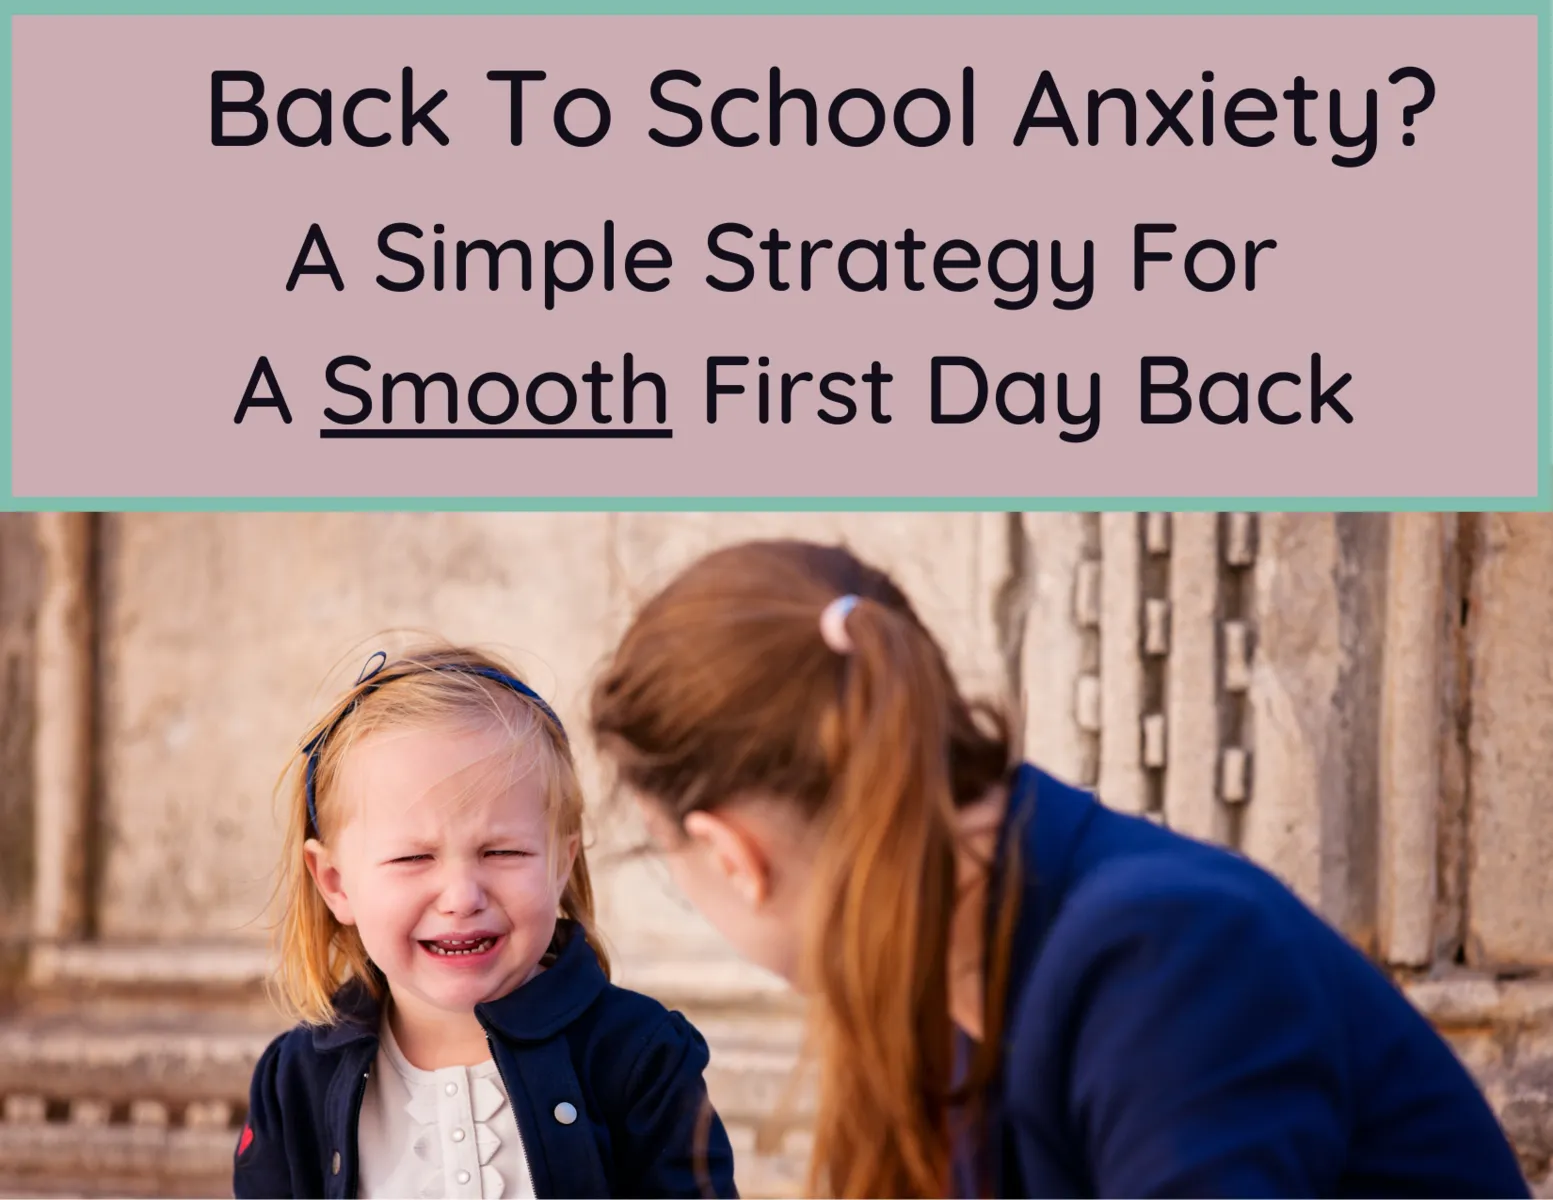 Back to School Anxiety? A Simple Strategy For A Smooth First Day Back